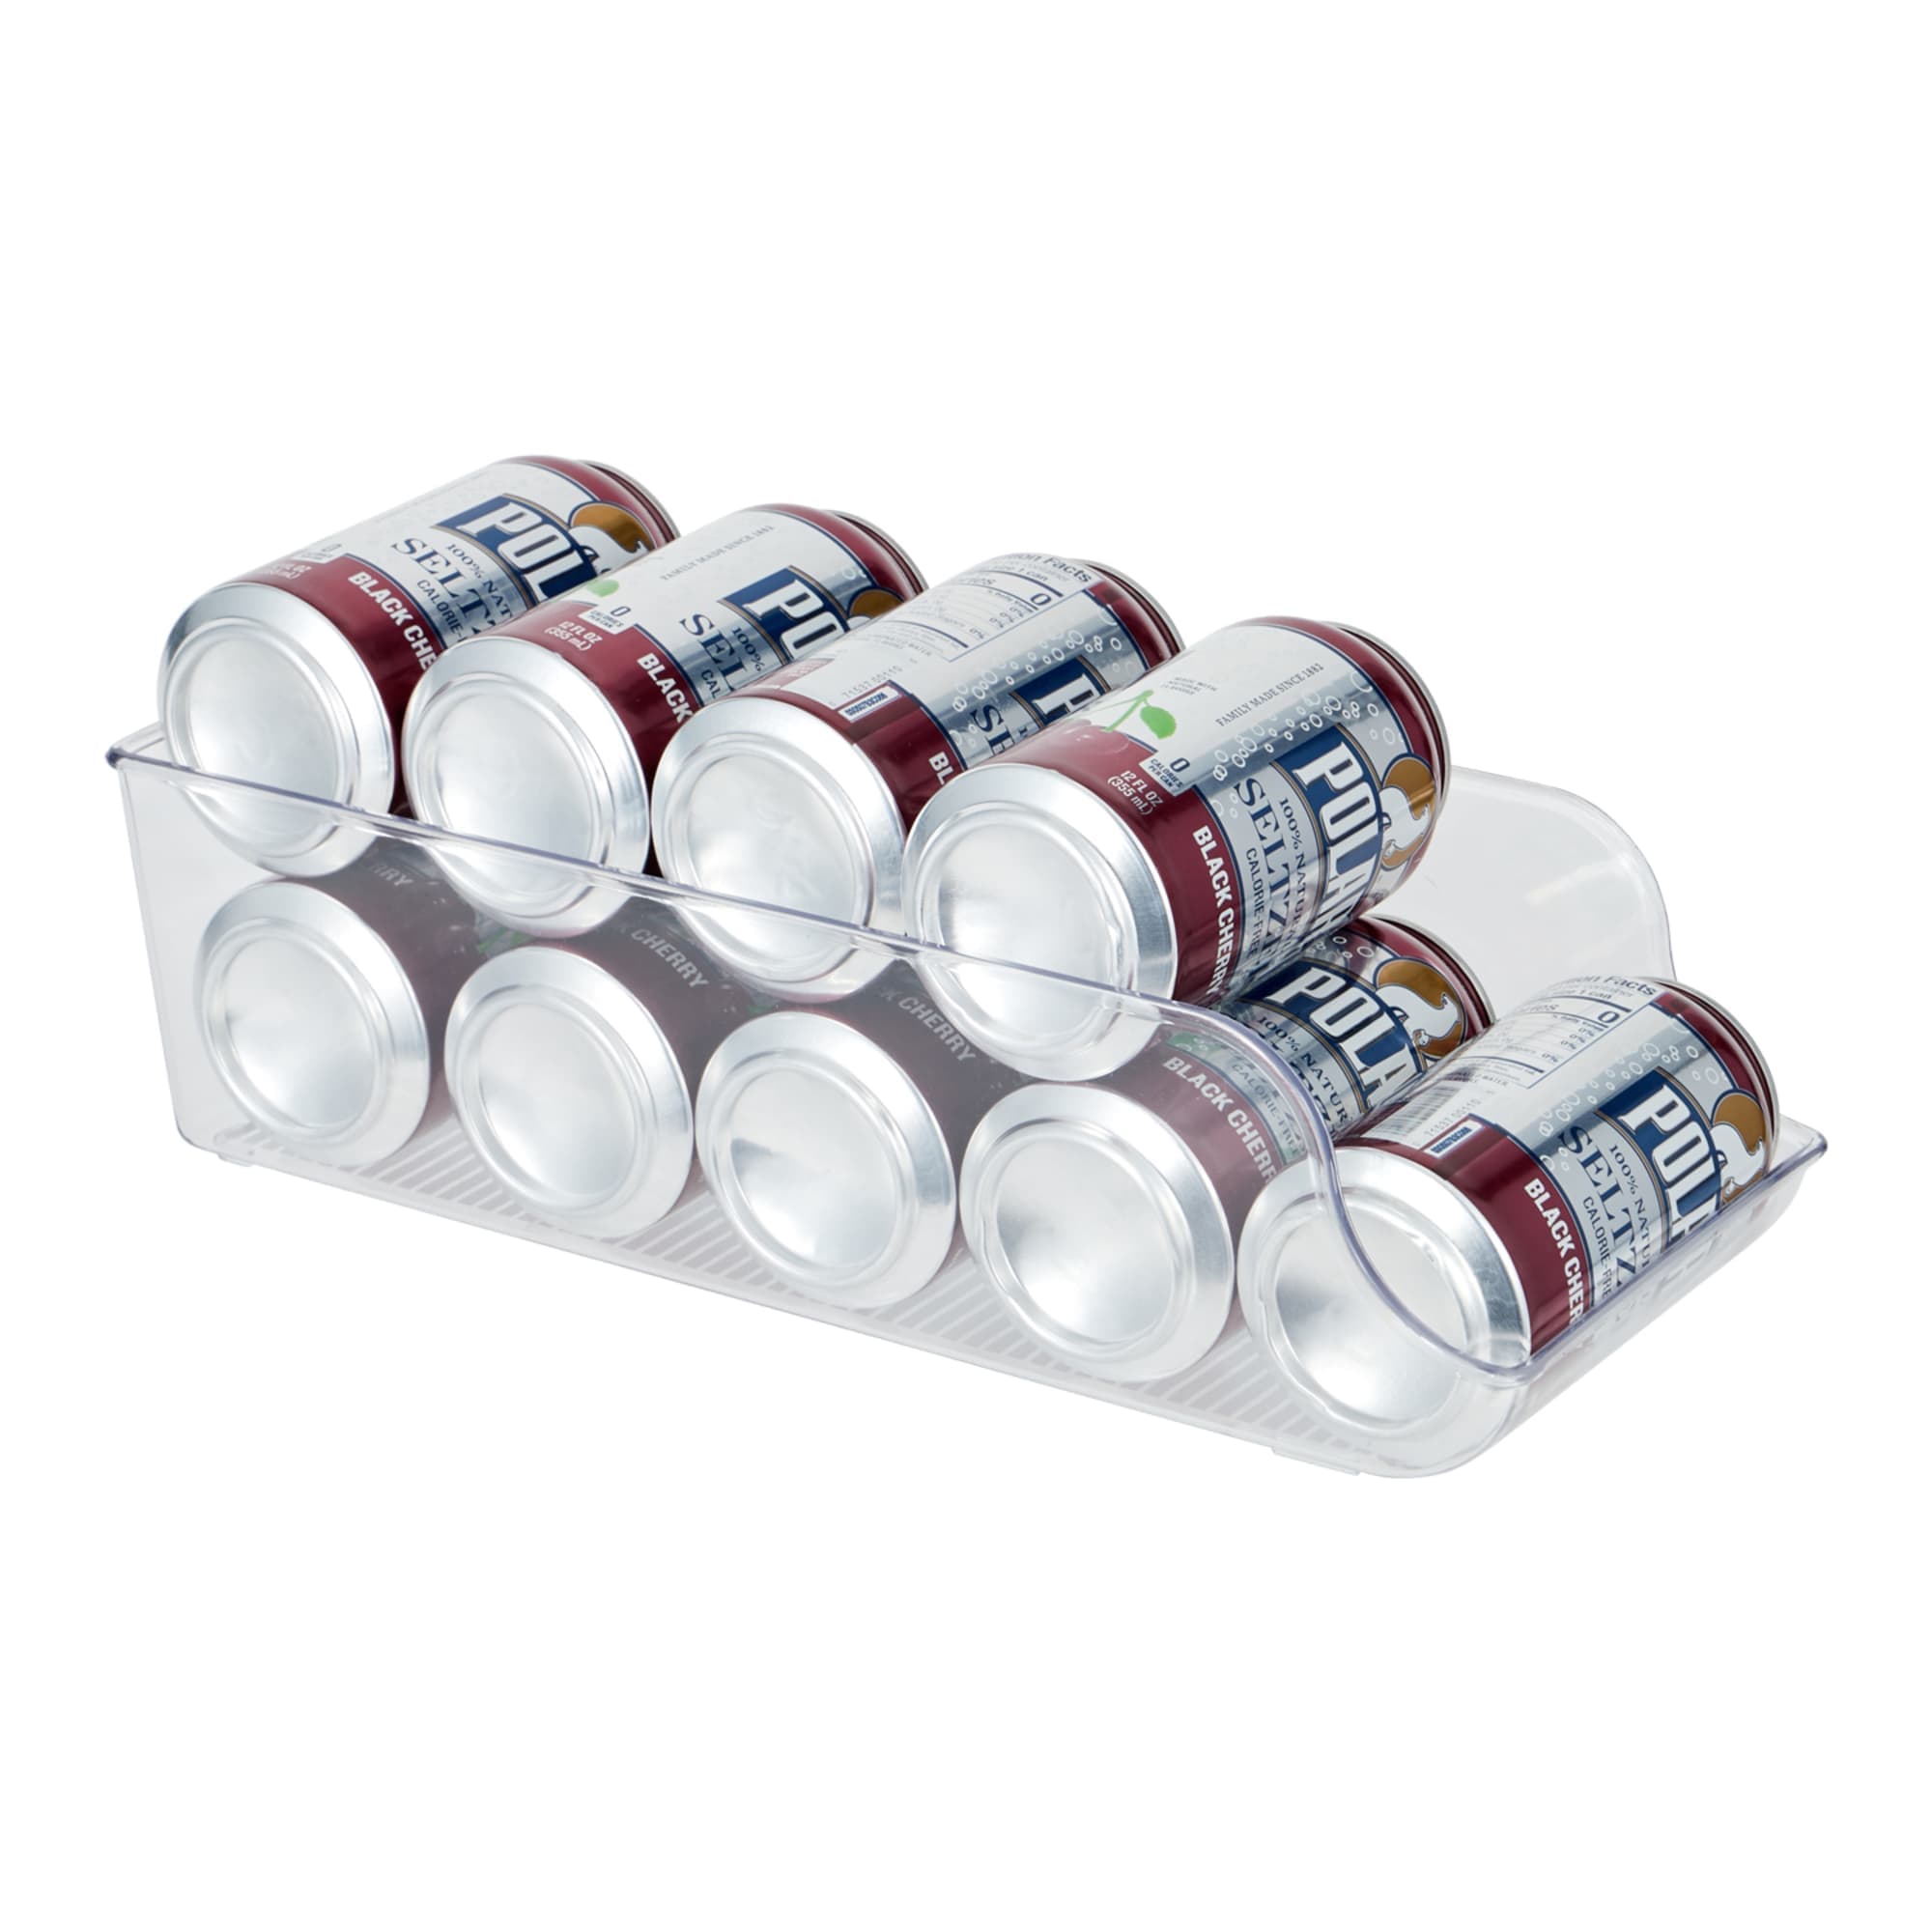 Home Basics Nestable Plastic Soda and Canned Food Dispenser, Clear $3.00 EACH, CASE PACK OF 12